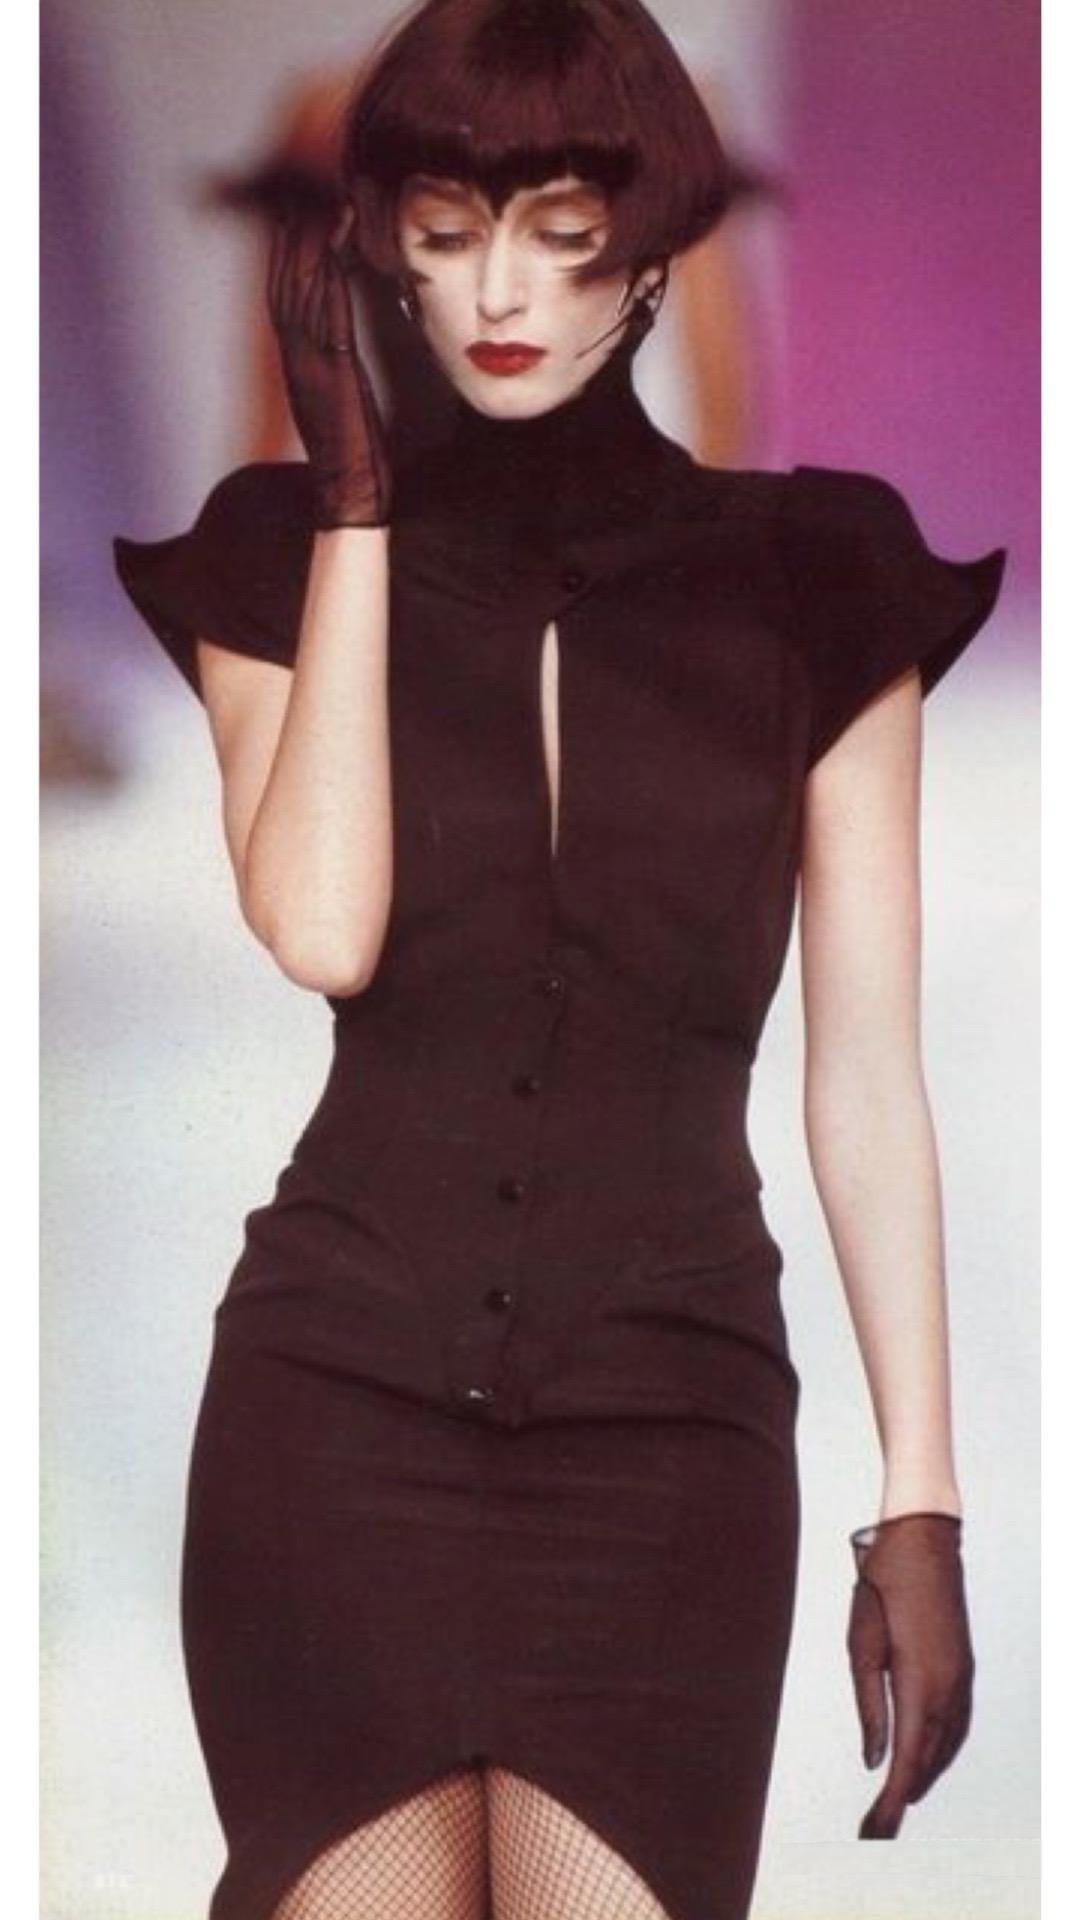 Add edge and drama your wardrobe with this Thierry Mugler sculptural dress from the Fall Winter “Les Infernales” 1988 collection and seen on the runway. This dress features a tall standing collar, zigzag jagged design at the chest, rounded shoulders